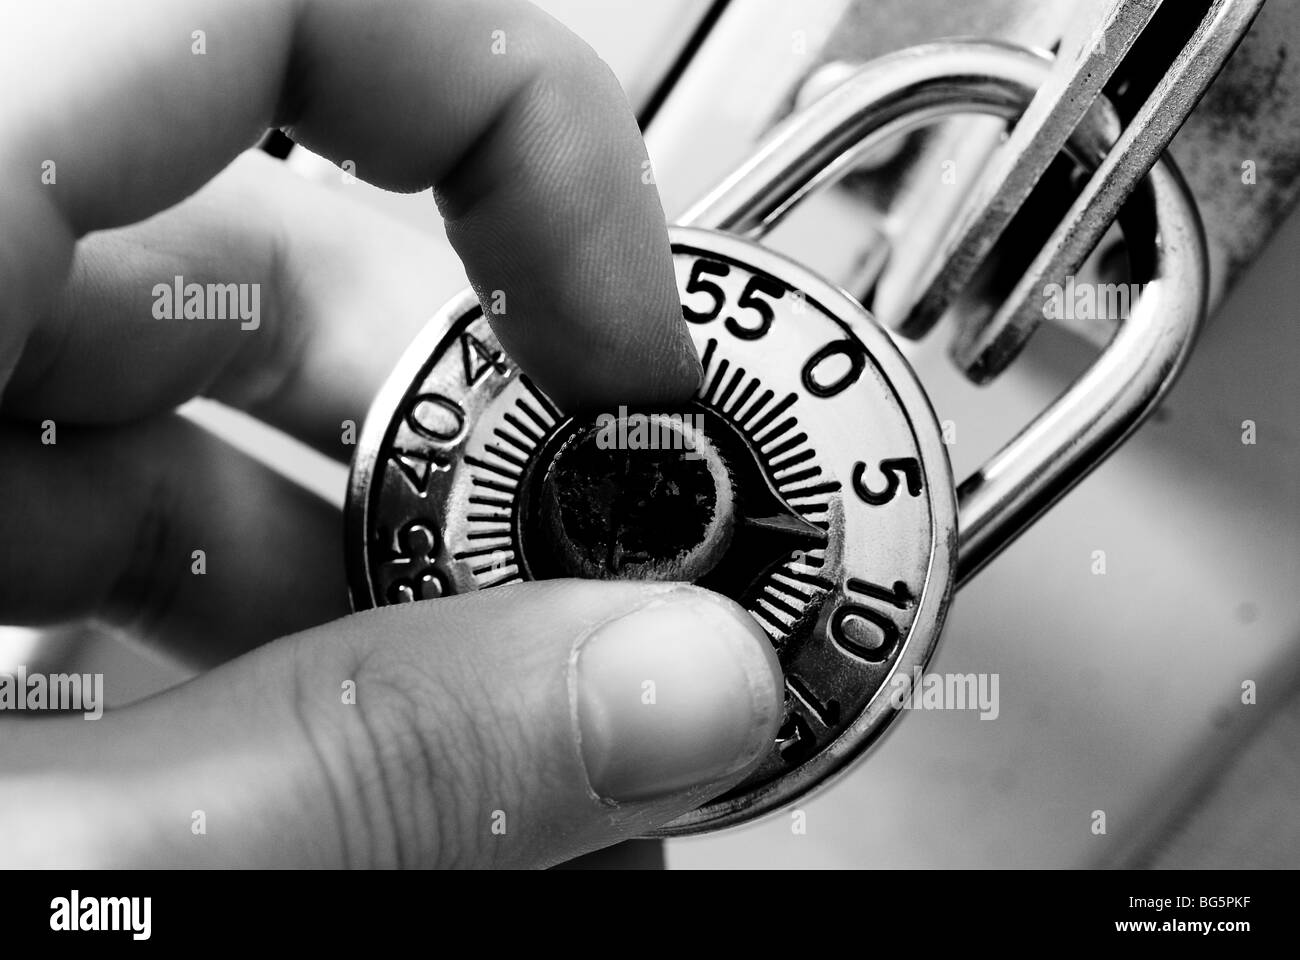 Fingers adjusting the dial on a traditional combination lock. Stock Photo